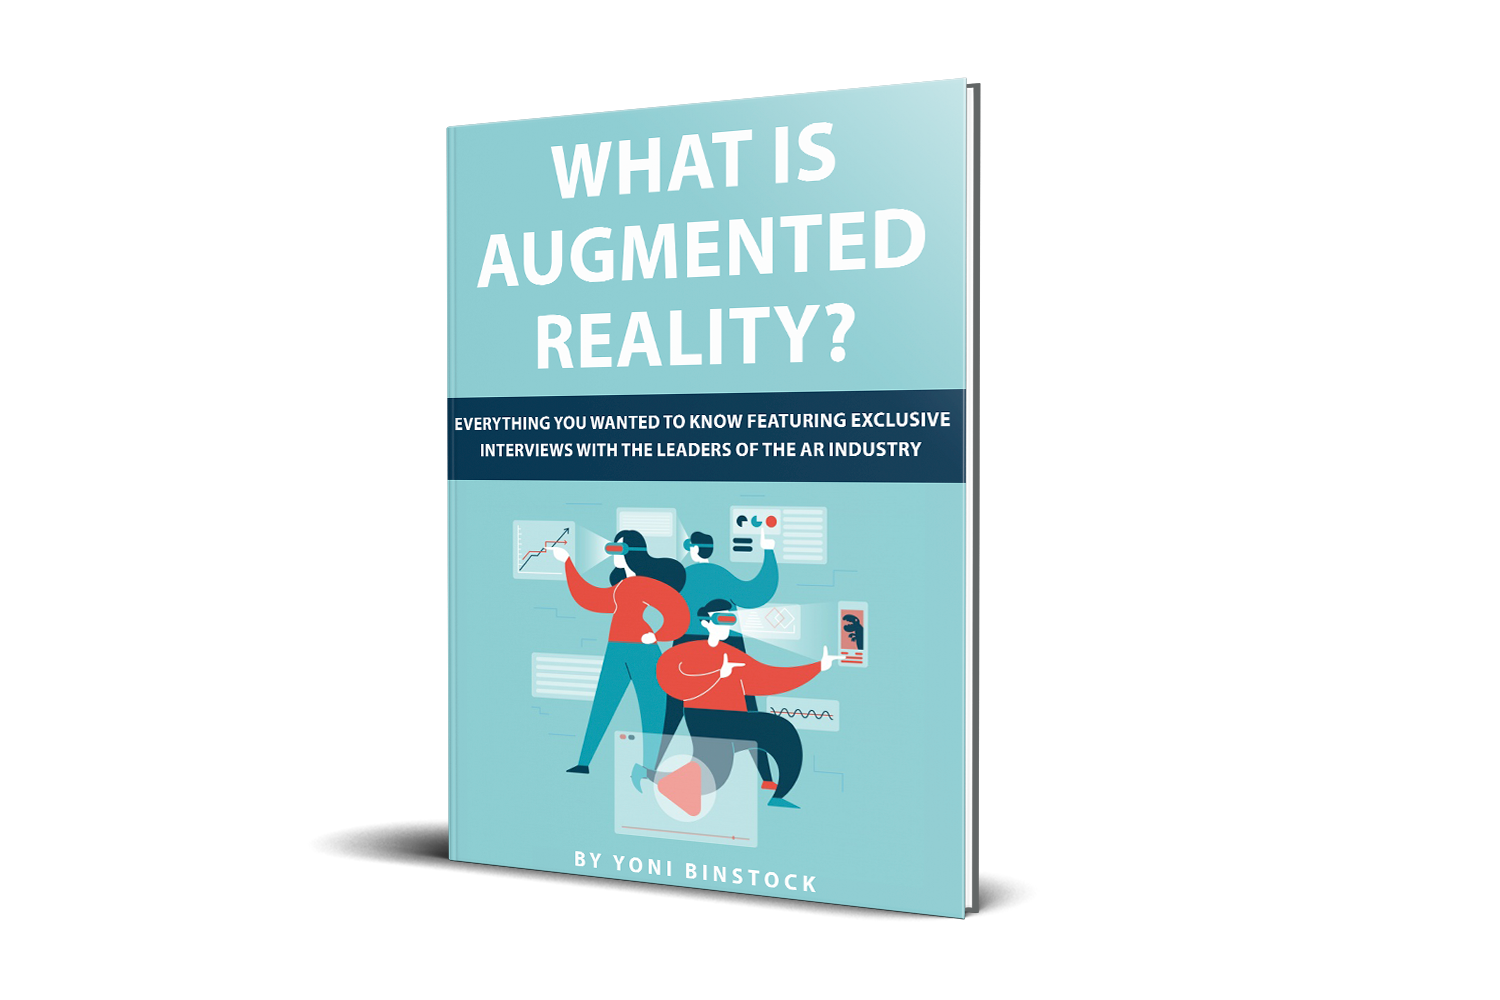 FREE: What is Augmented Reality? : Everything You Wanted to Know Featuring Exclusive Interviews With the Leaders of the AR Industry by Yoni Binstock